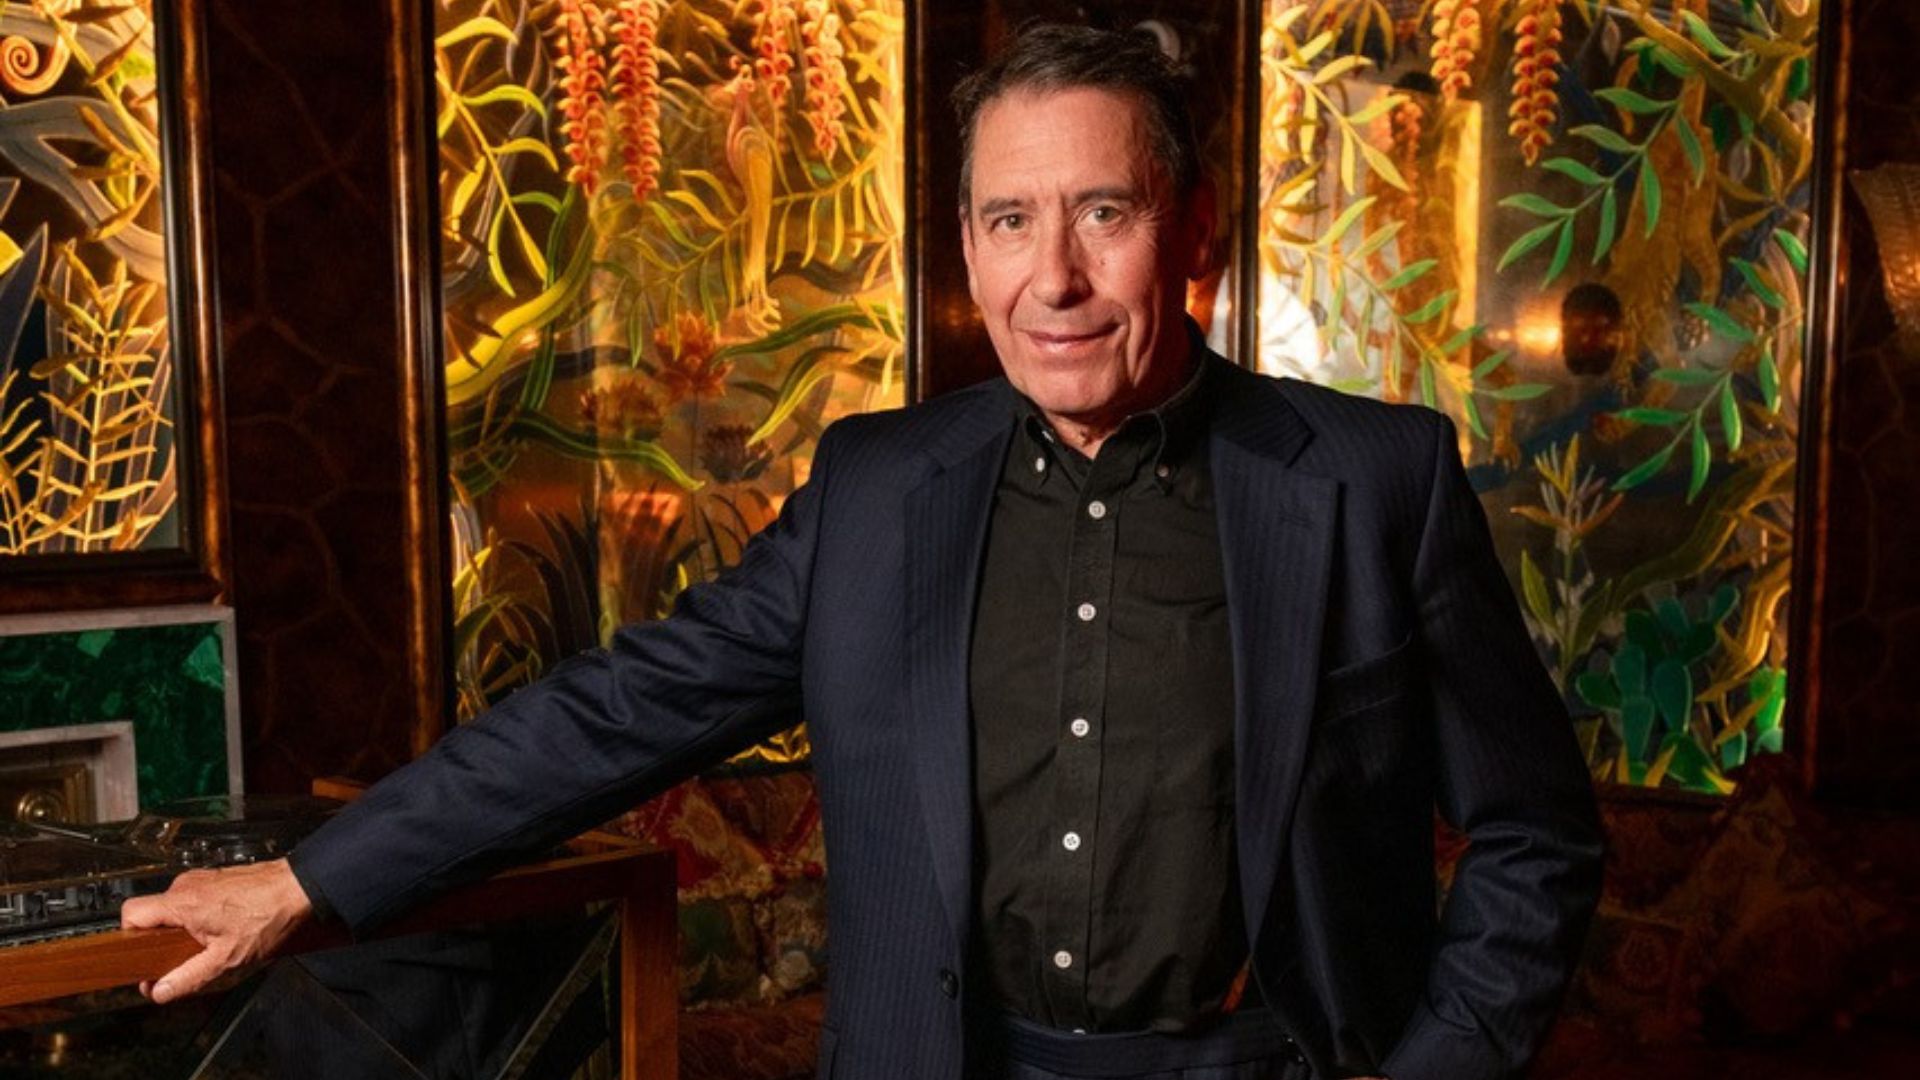 Jools Holland in a black suit with colourful paintings of plants in the background